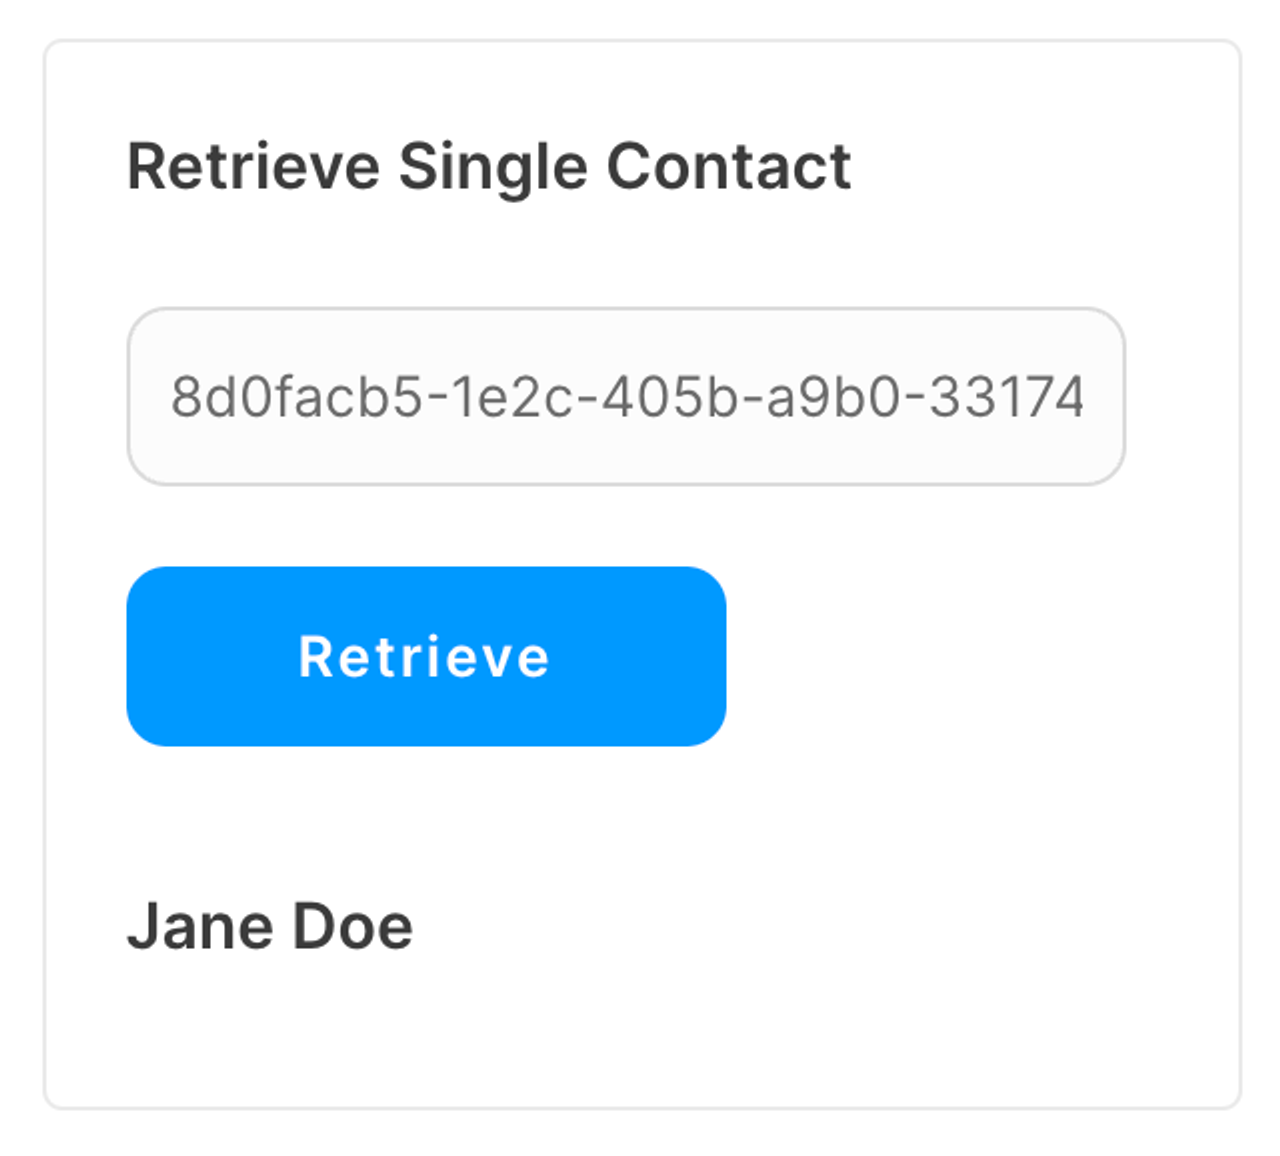 In this example, our Contact named "Jane Doe" was returned and displayed in the group.